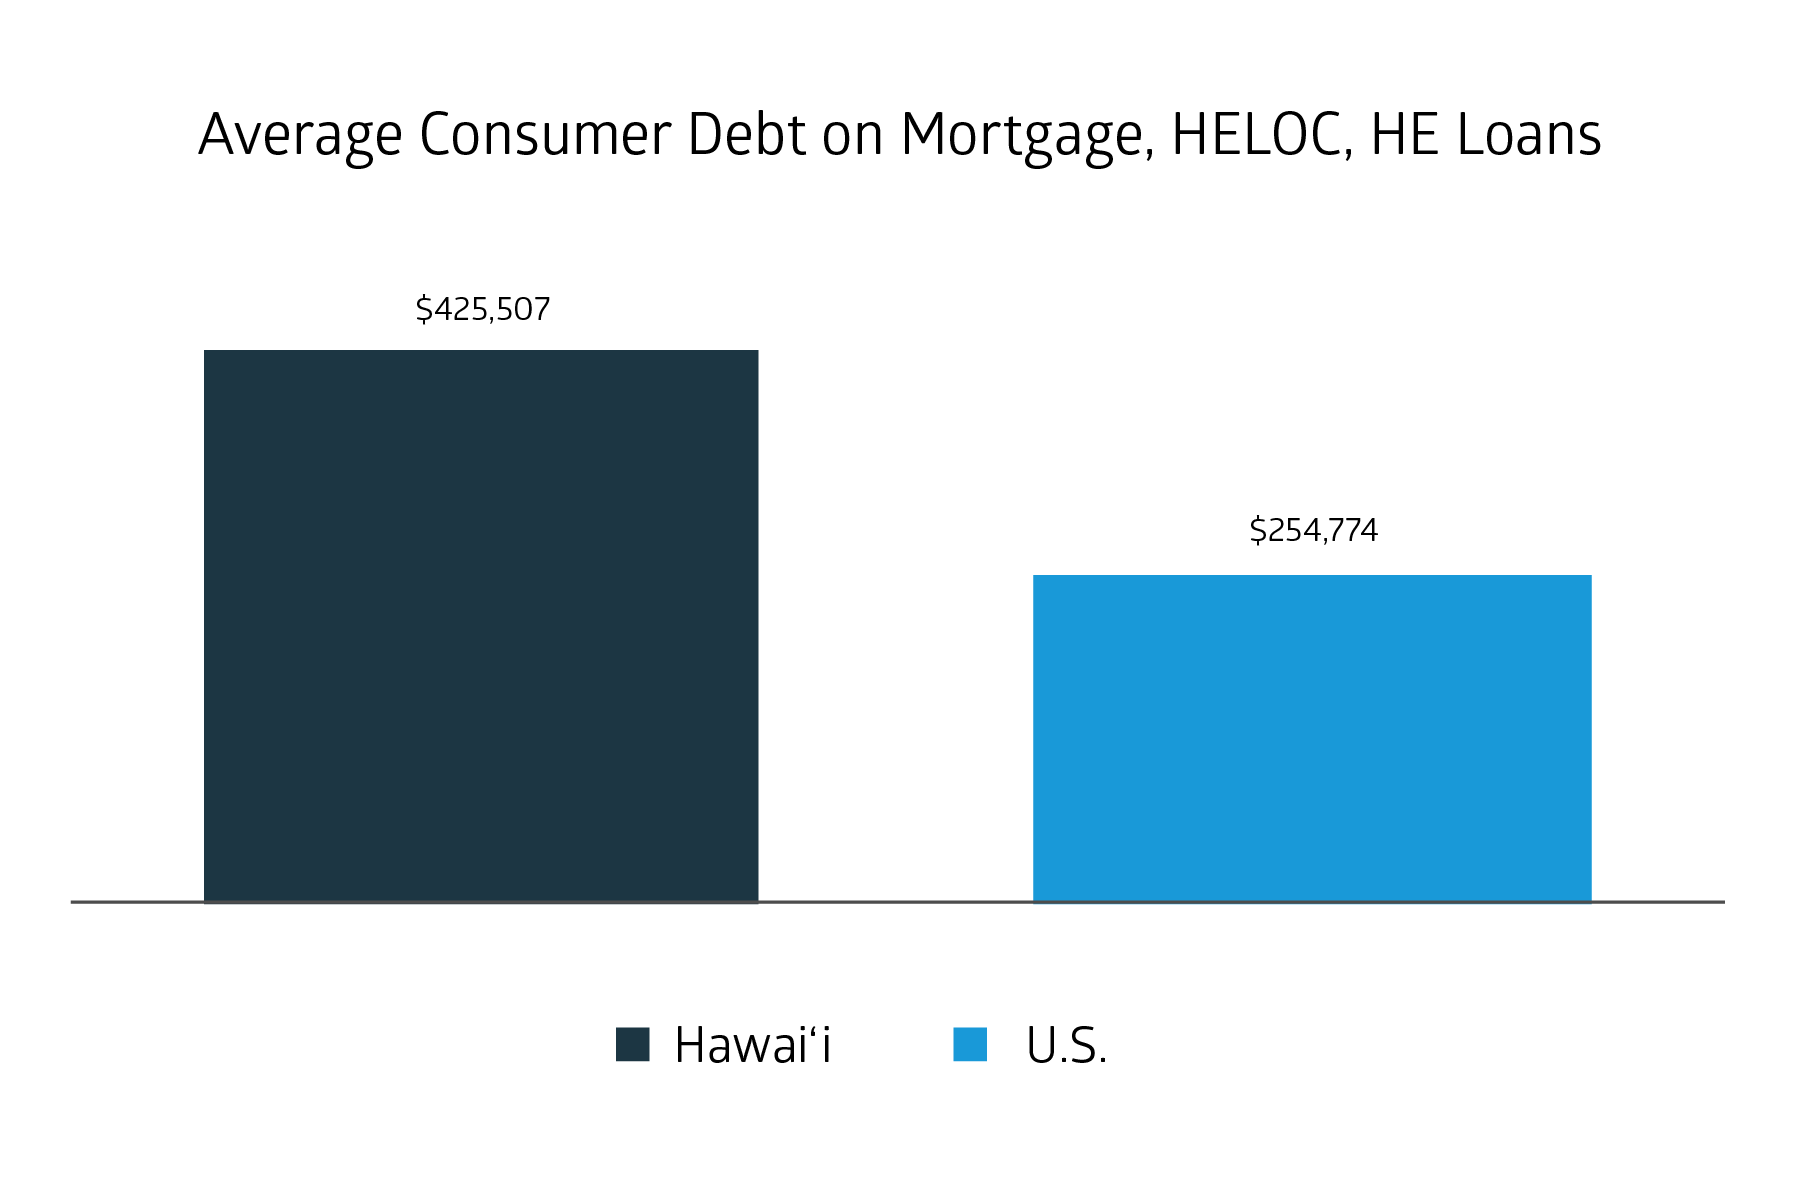 High levels of consumer debt add to Hawaii household financial